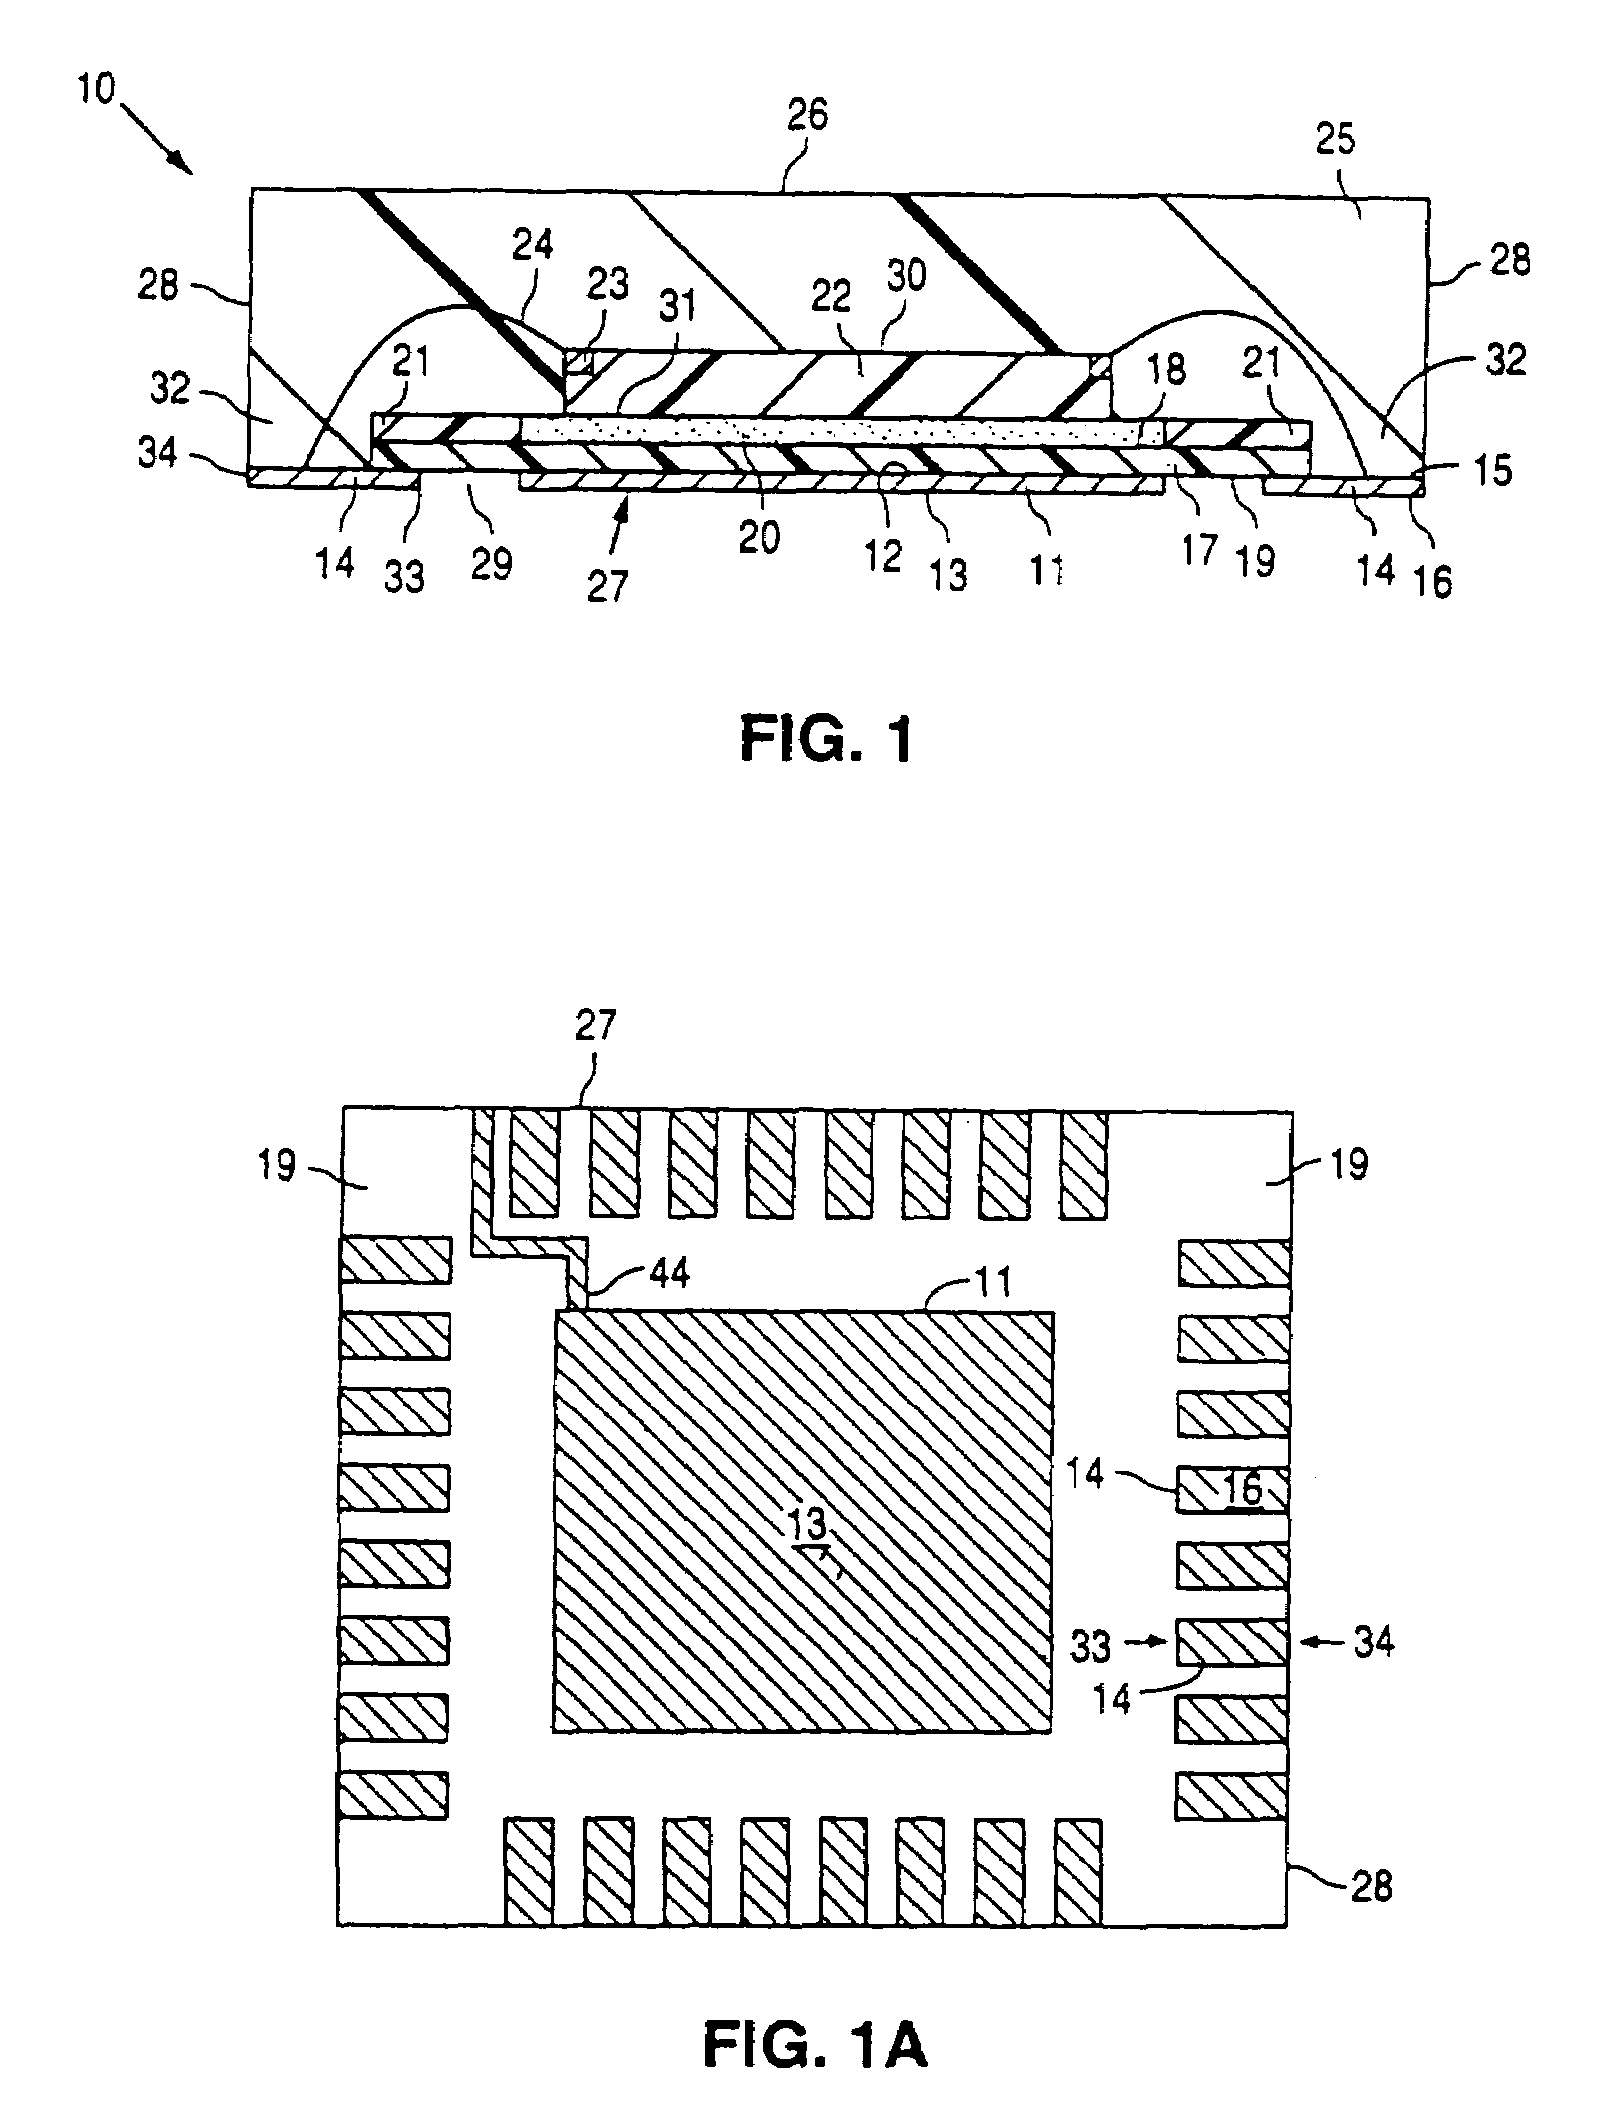 Integrated circuit device packages and substrates for making the packages